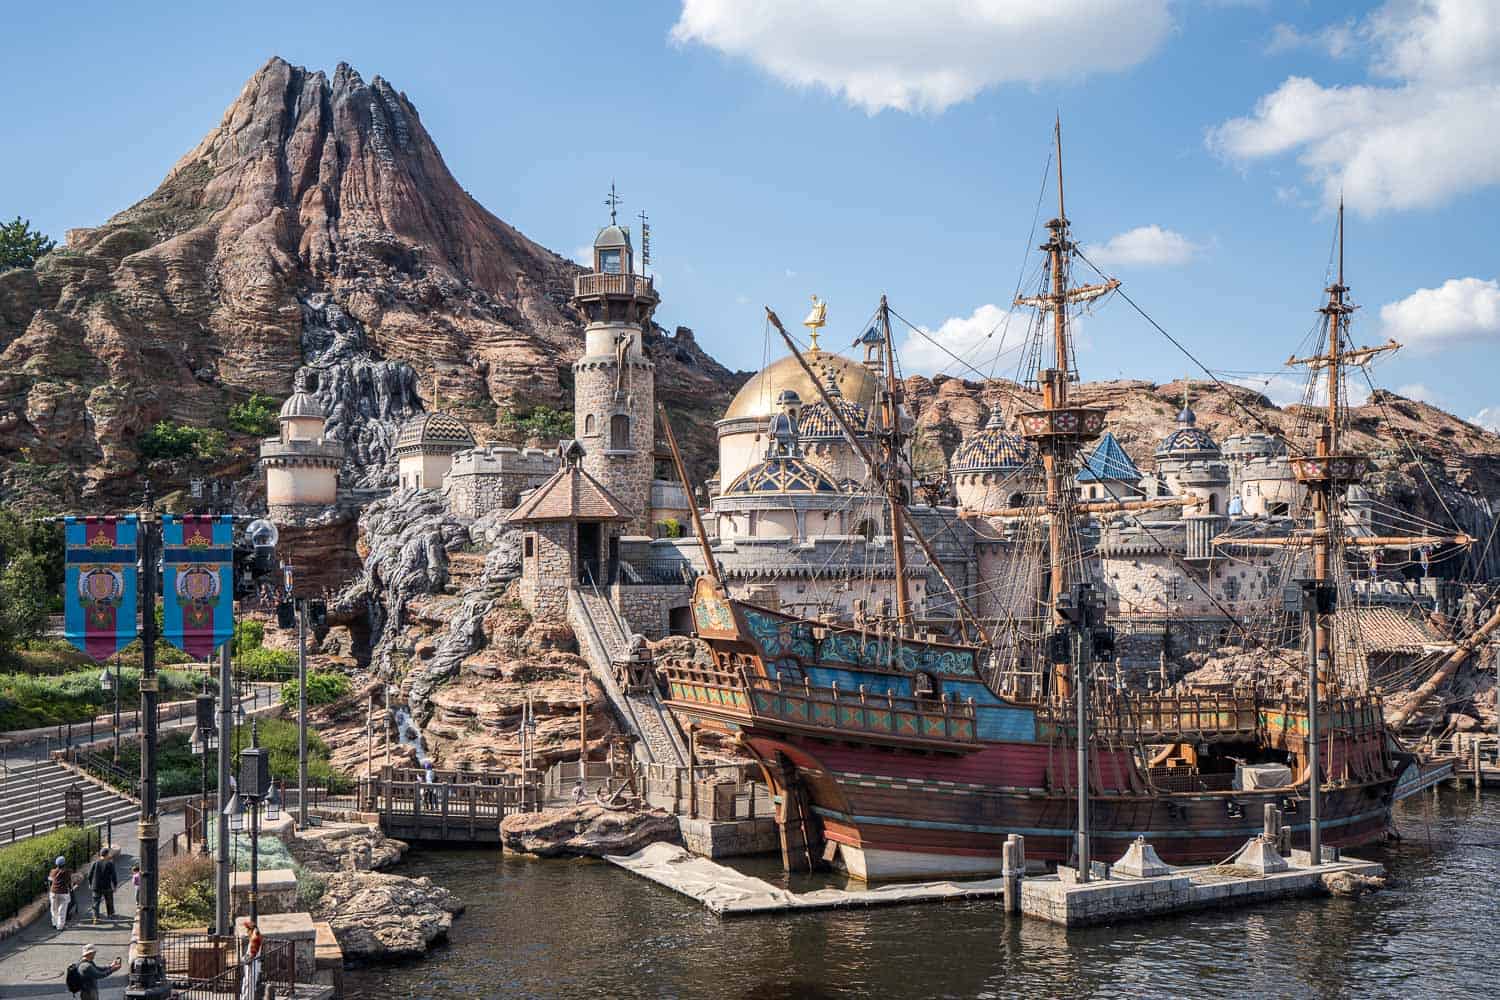 Fortress Explorations, one of the best Tokyo Disneysea attractions